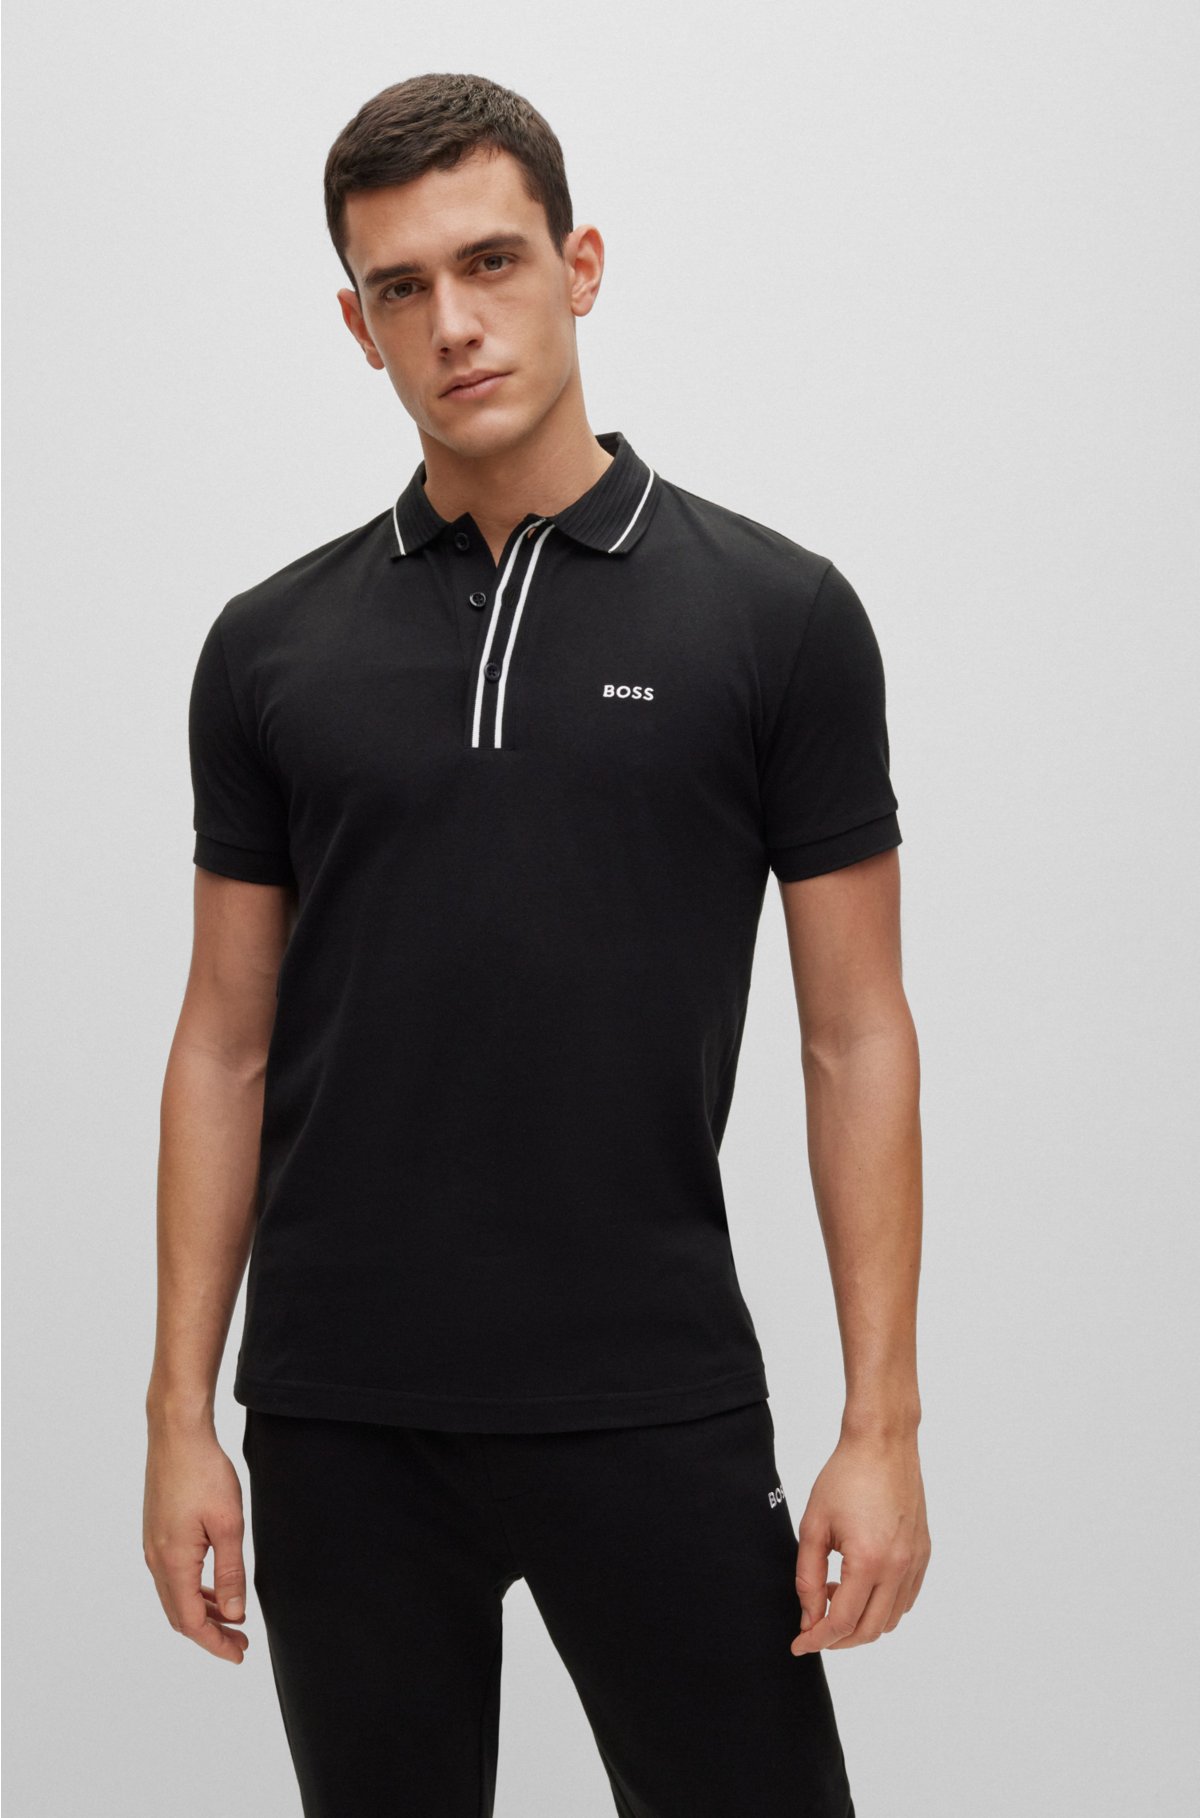 BOSS - Cotton-jersey polo shirt with contrast stripes and logo